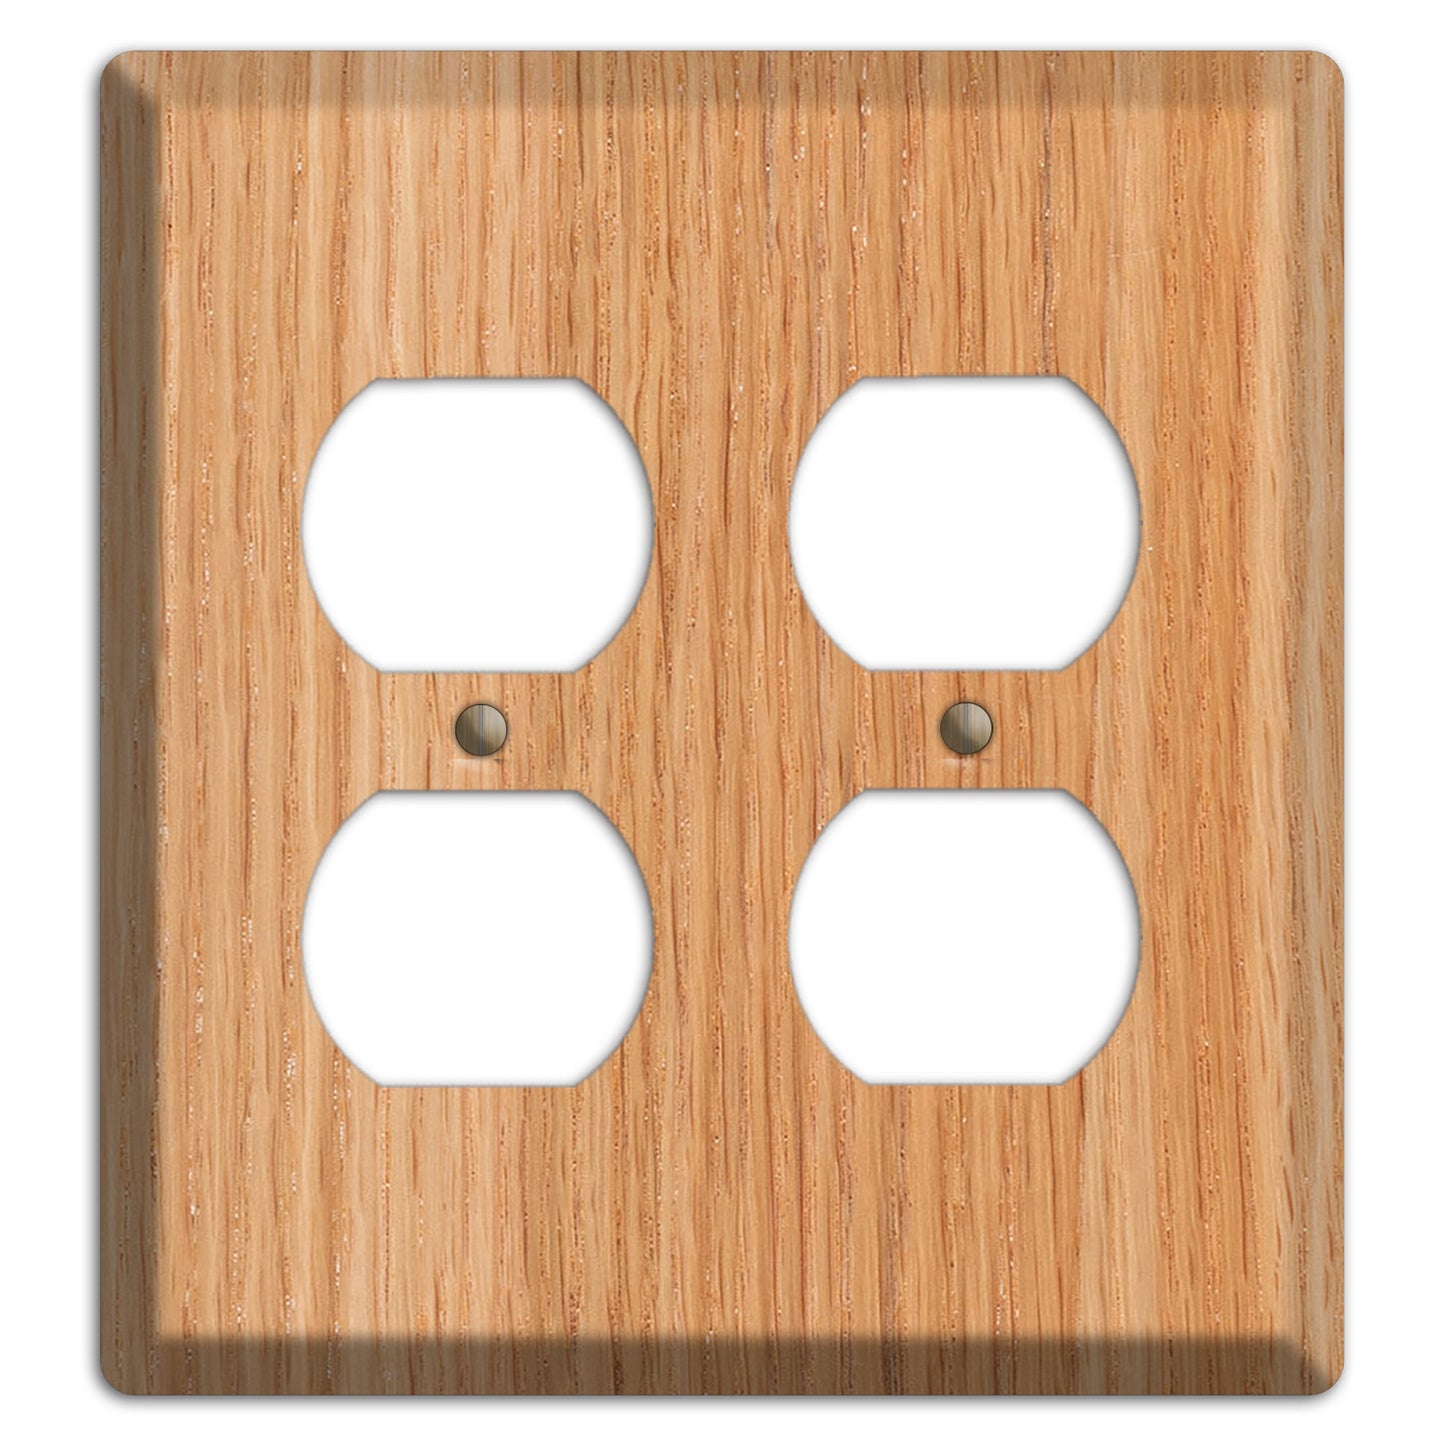 Unfinished Red Oak Wood 2 Duplex Outlet Cover Plate